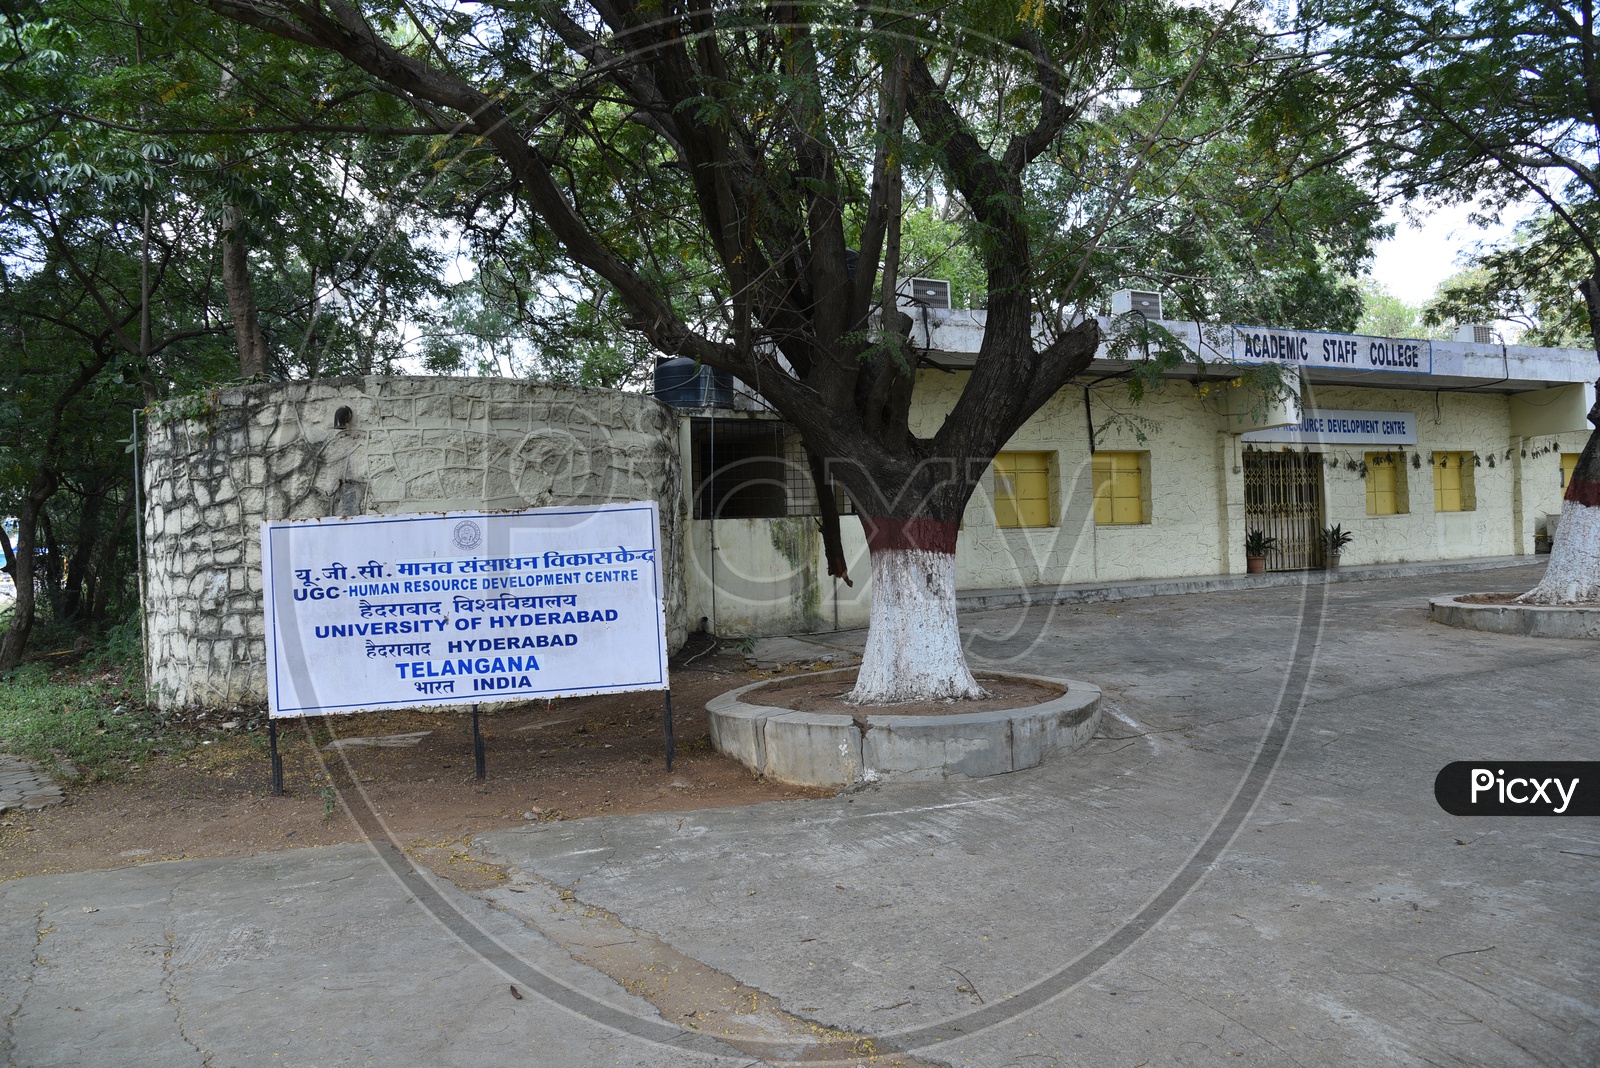 Academic Staff College at University of Hyderabad